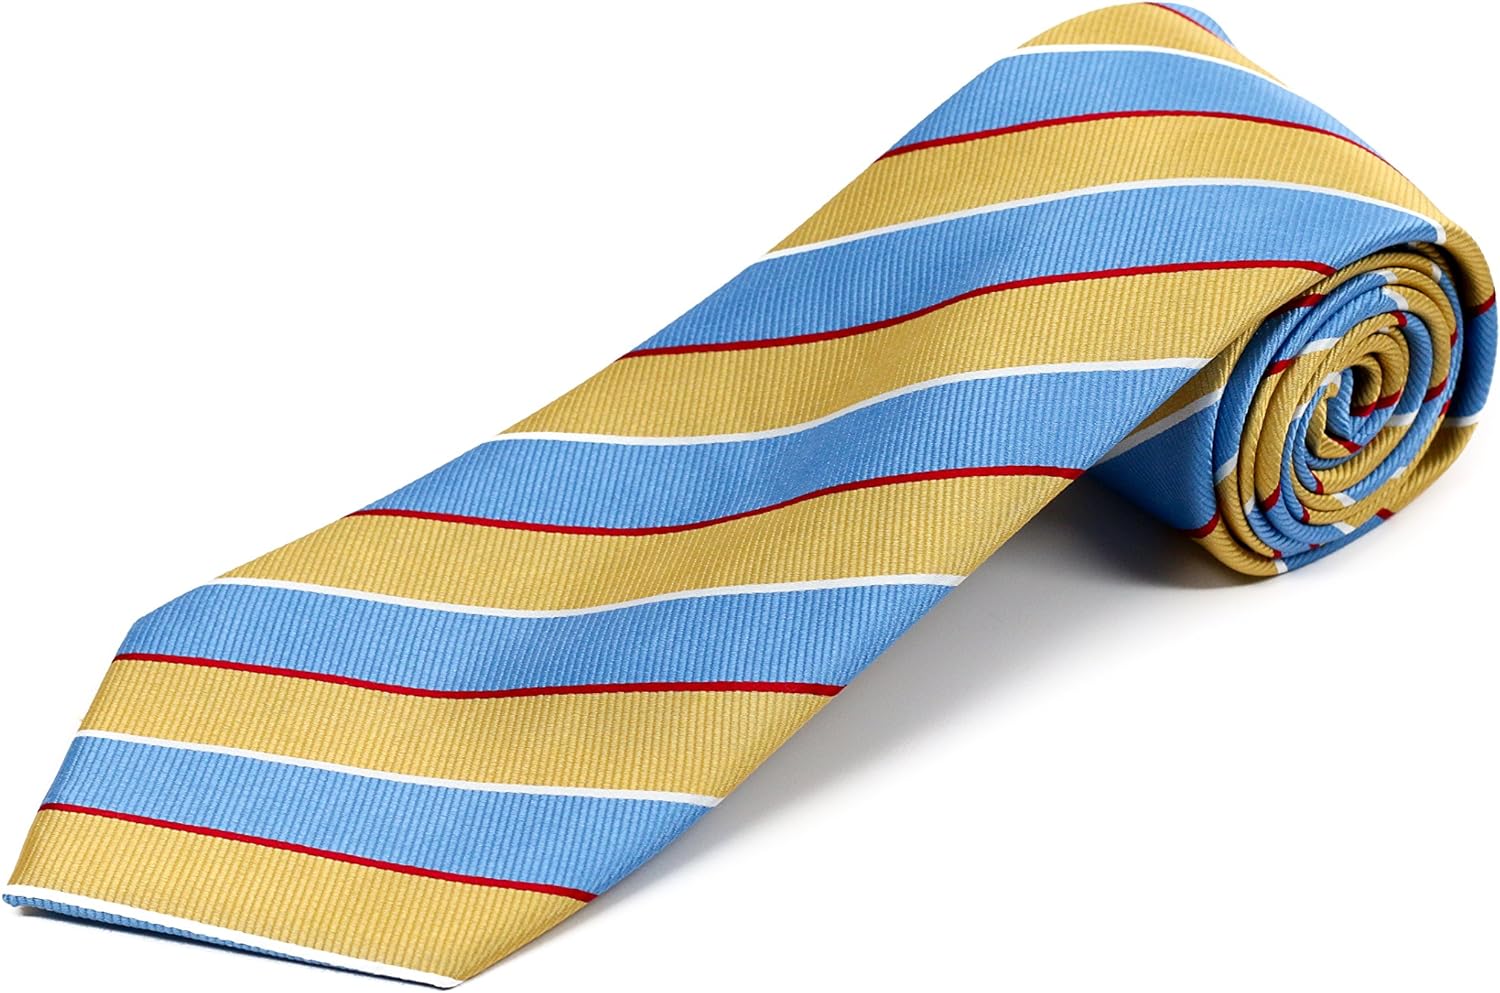 100% Silk Extra Long Yellow and Blue Striped Tie - 63 Inches Long